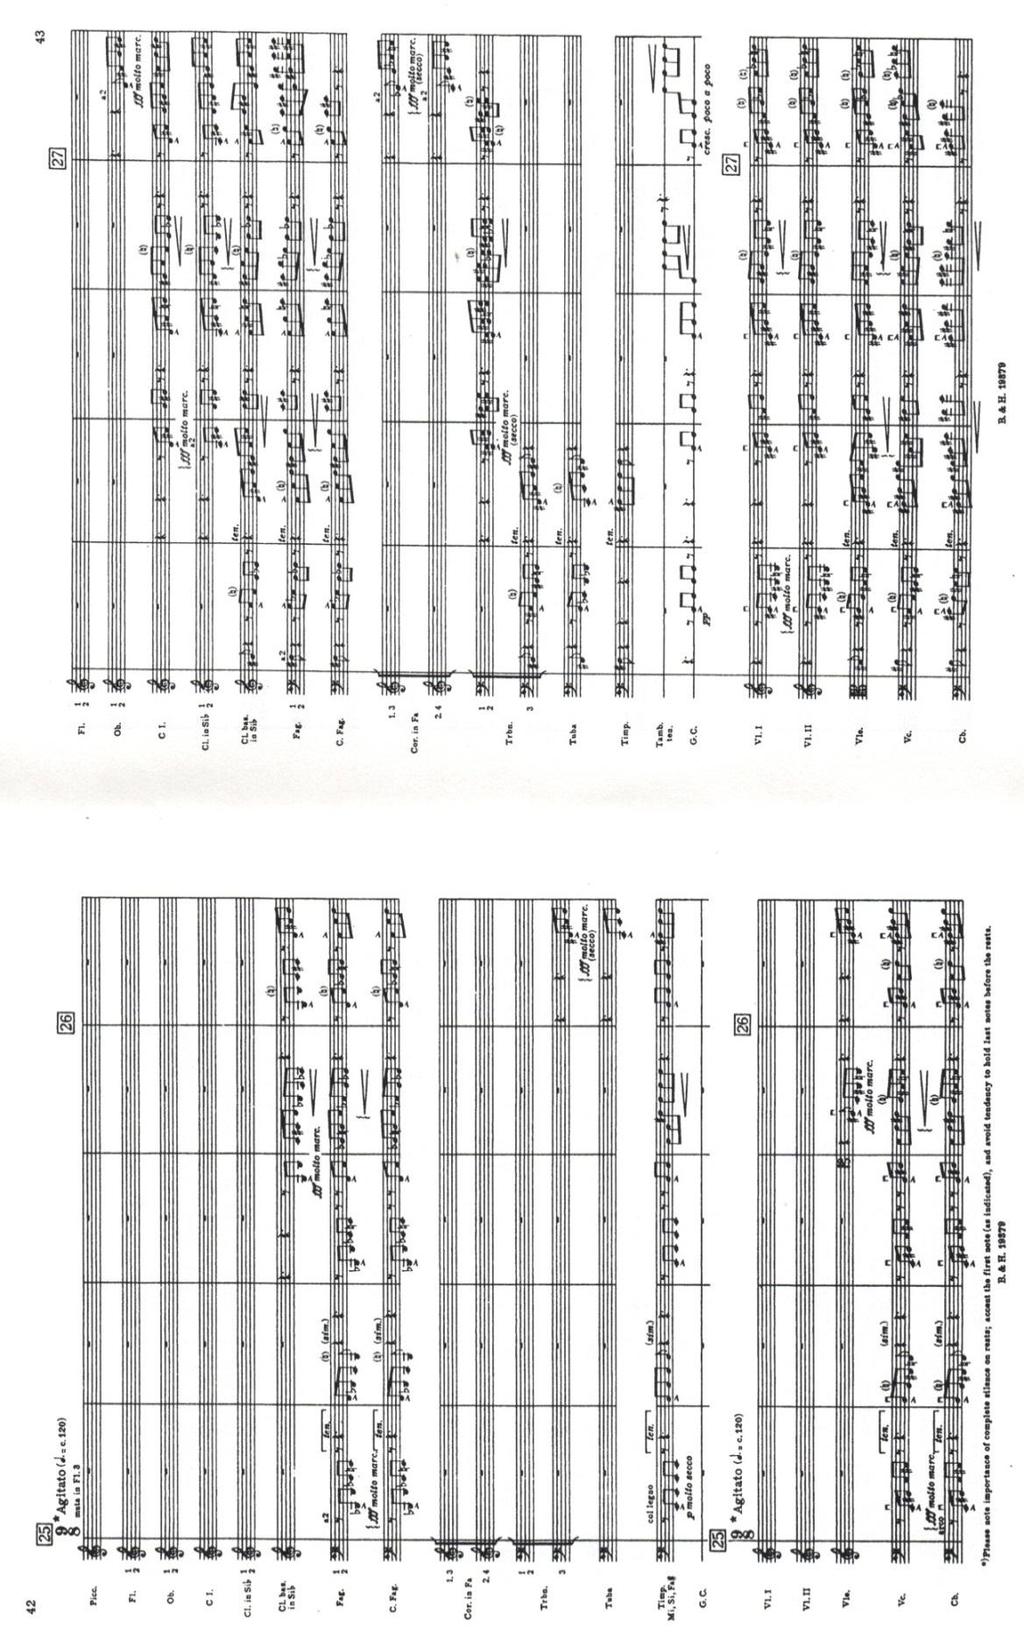 Appendix IV: Score of Vision III of Sinfonia Sacra from RM.25.